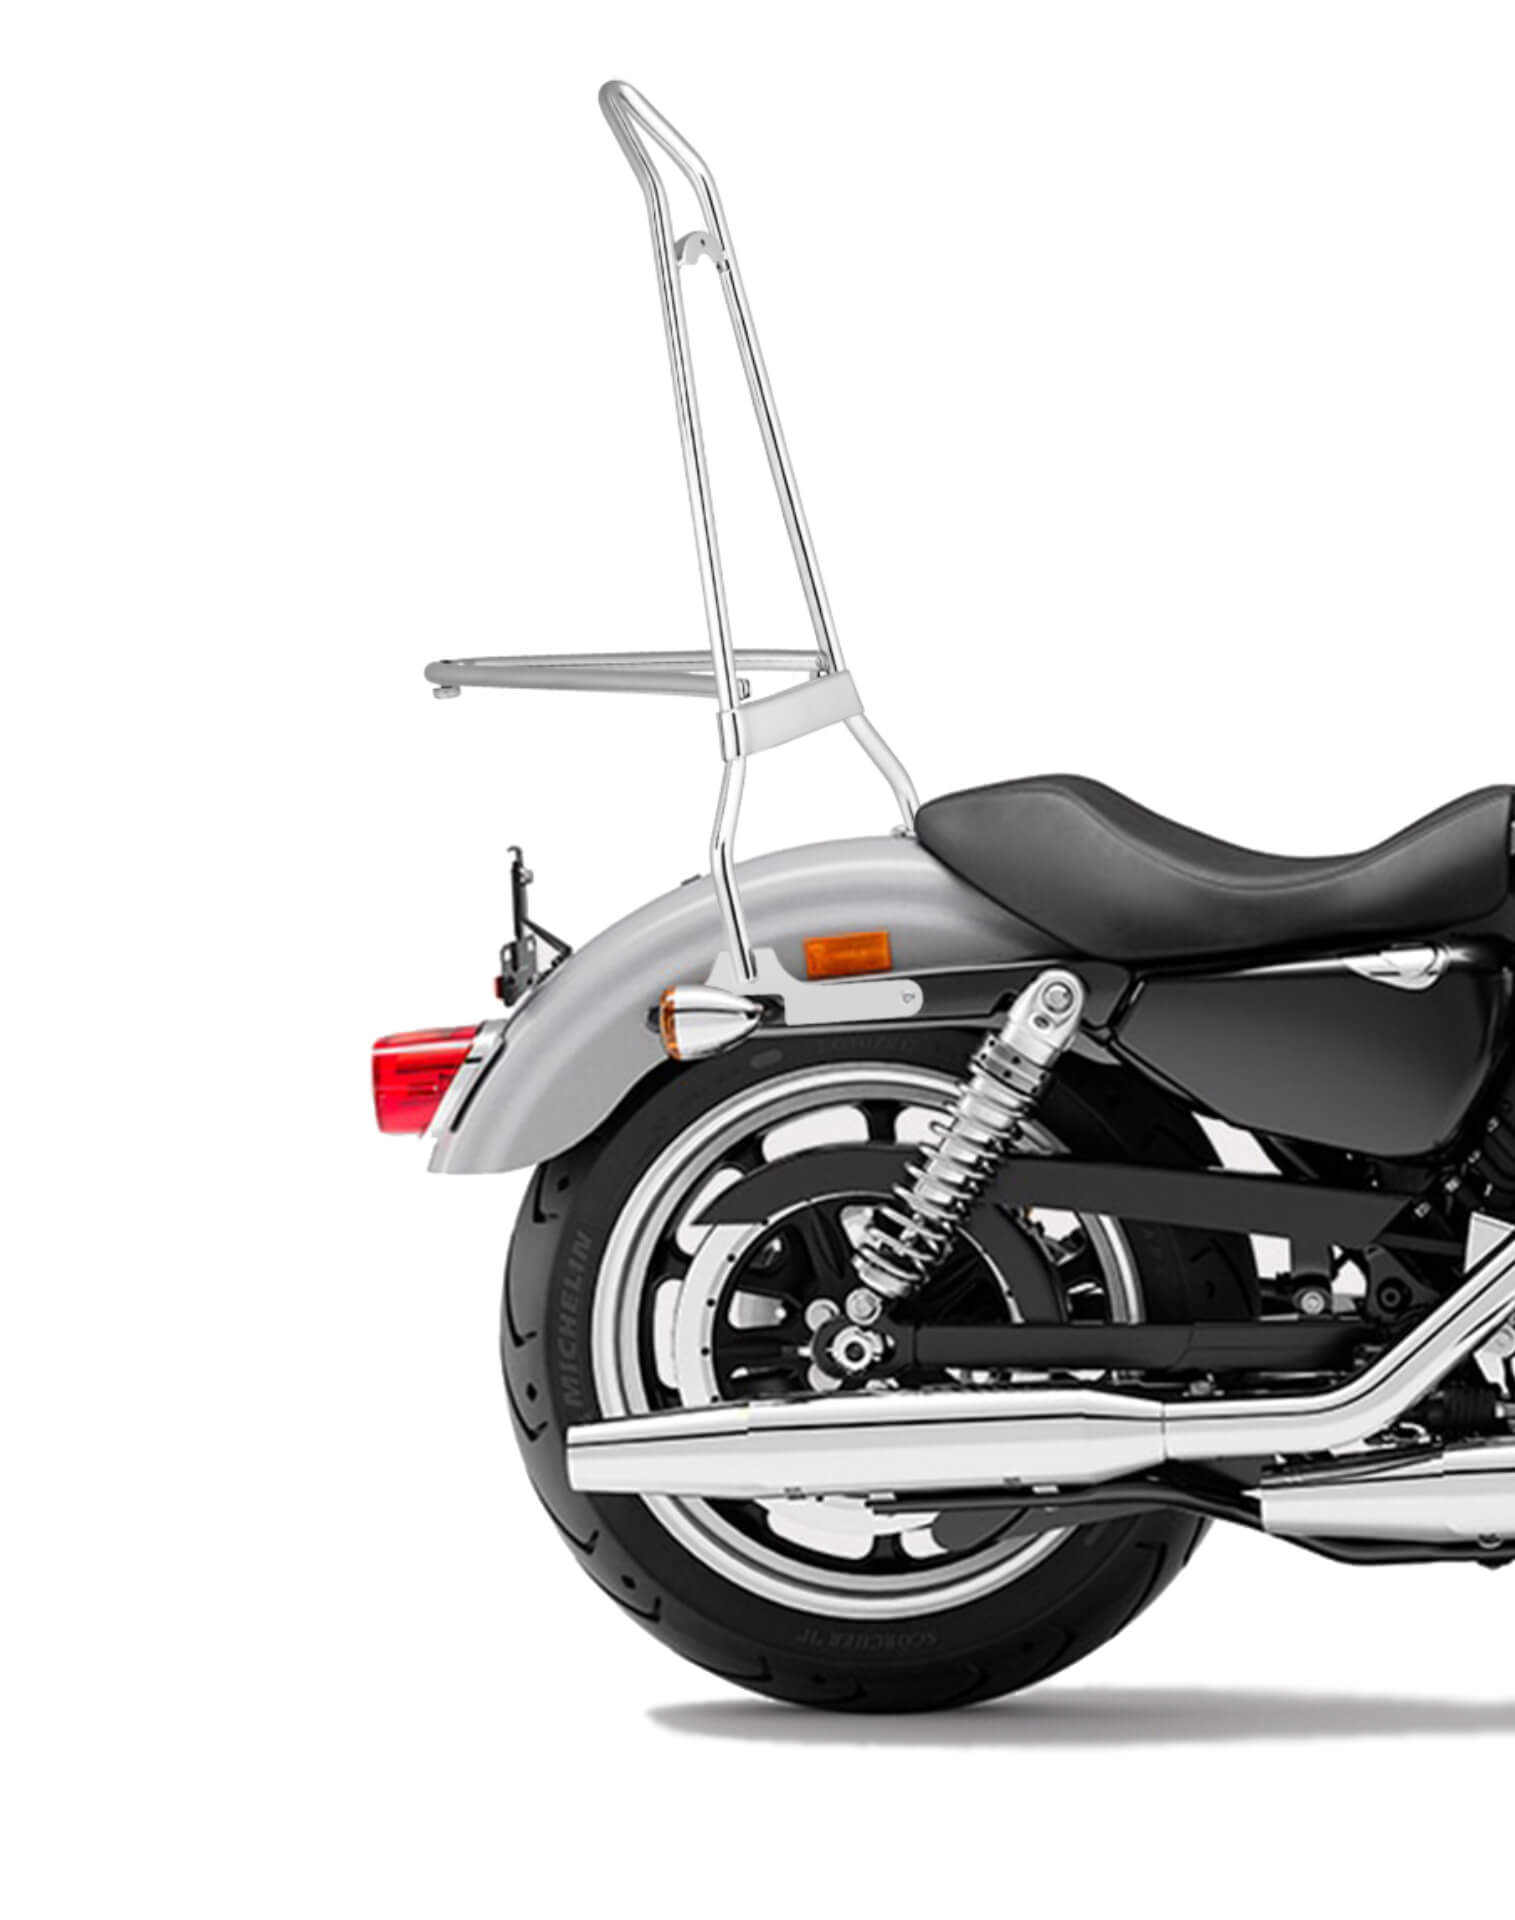 Iron Born Blade 25" Sissy Bar with Foldable Luggage Rack for Harley Sportster SuperLow Chrome Close Up View